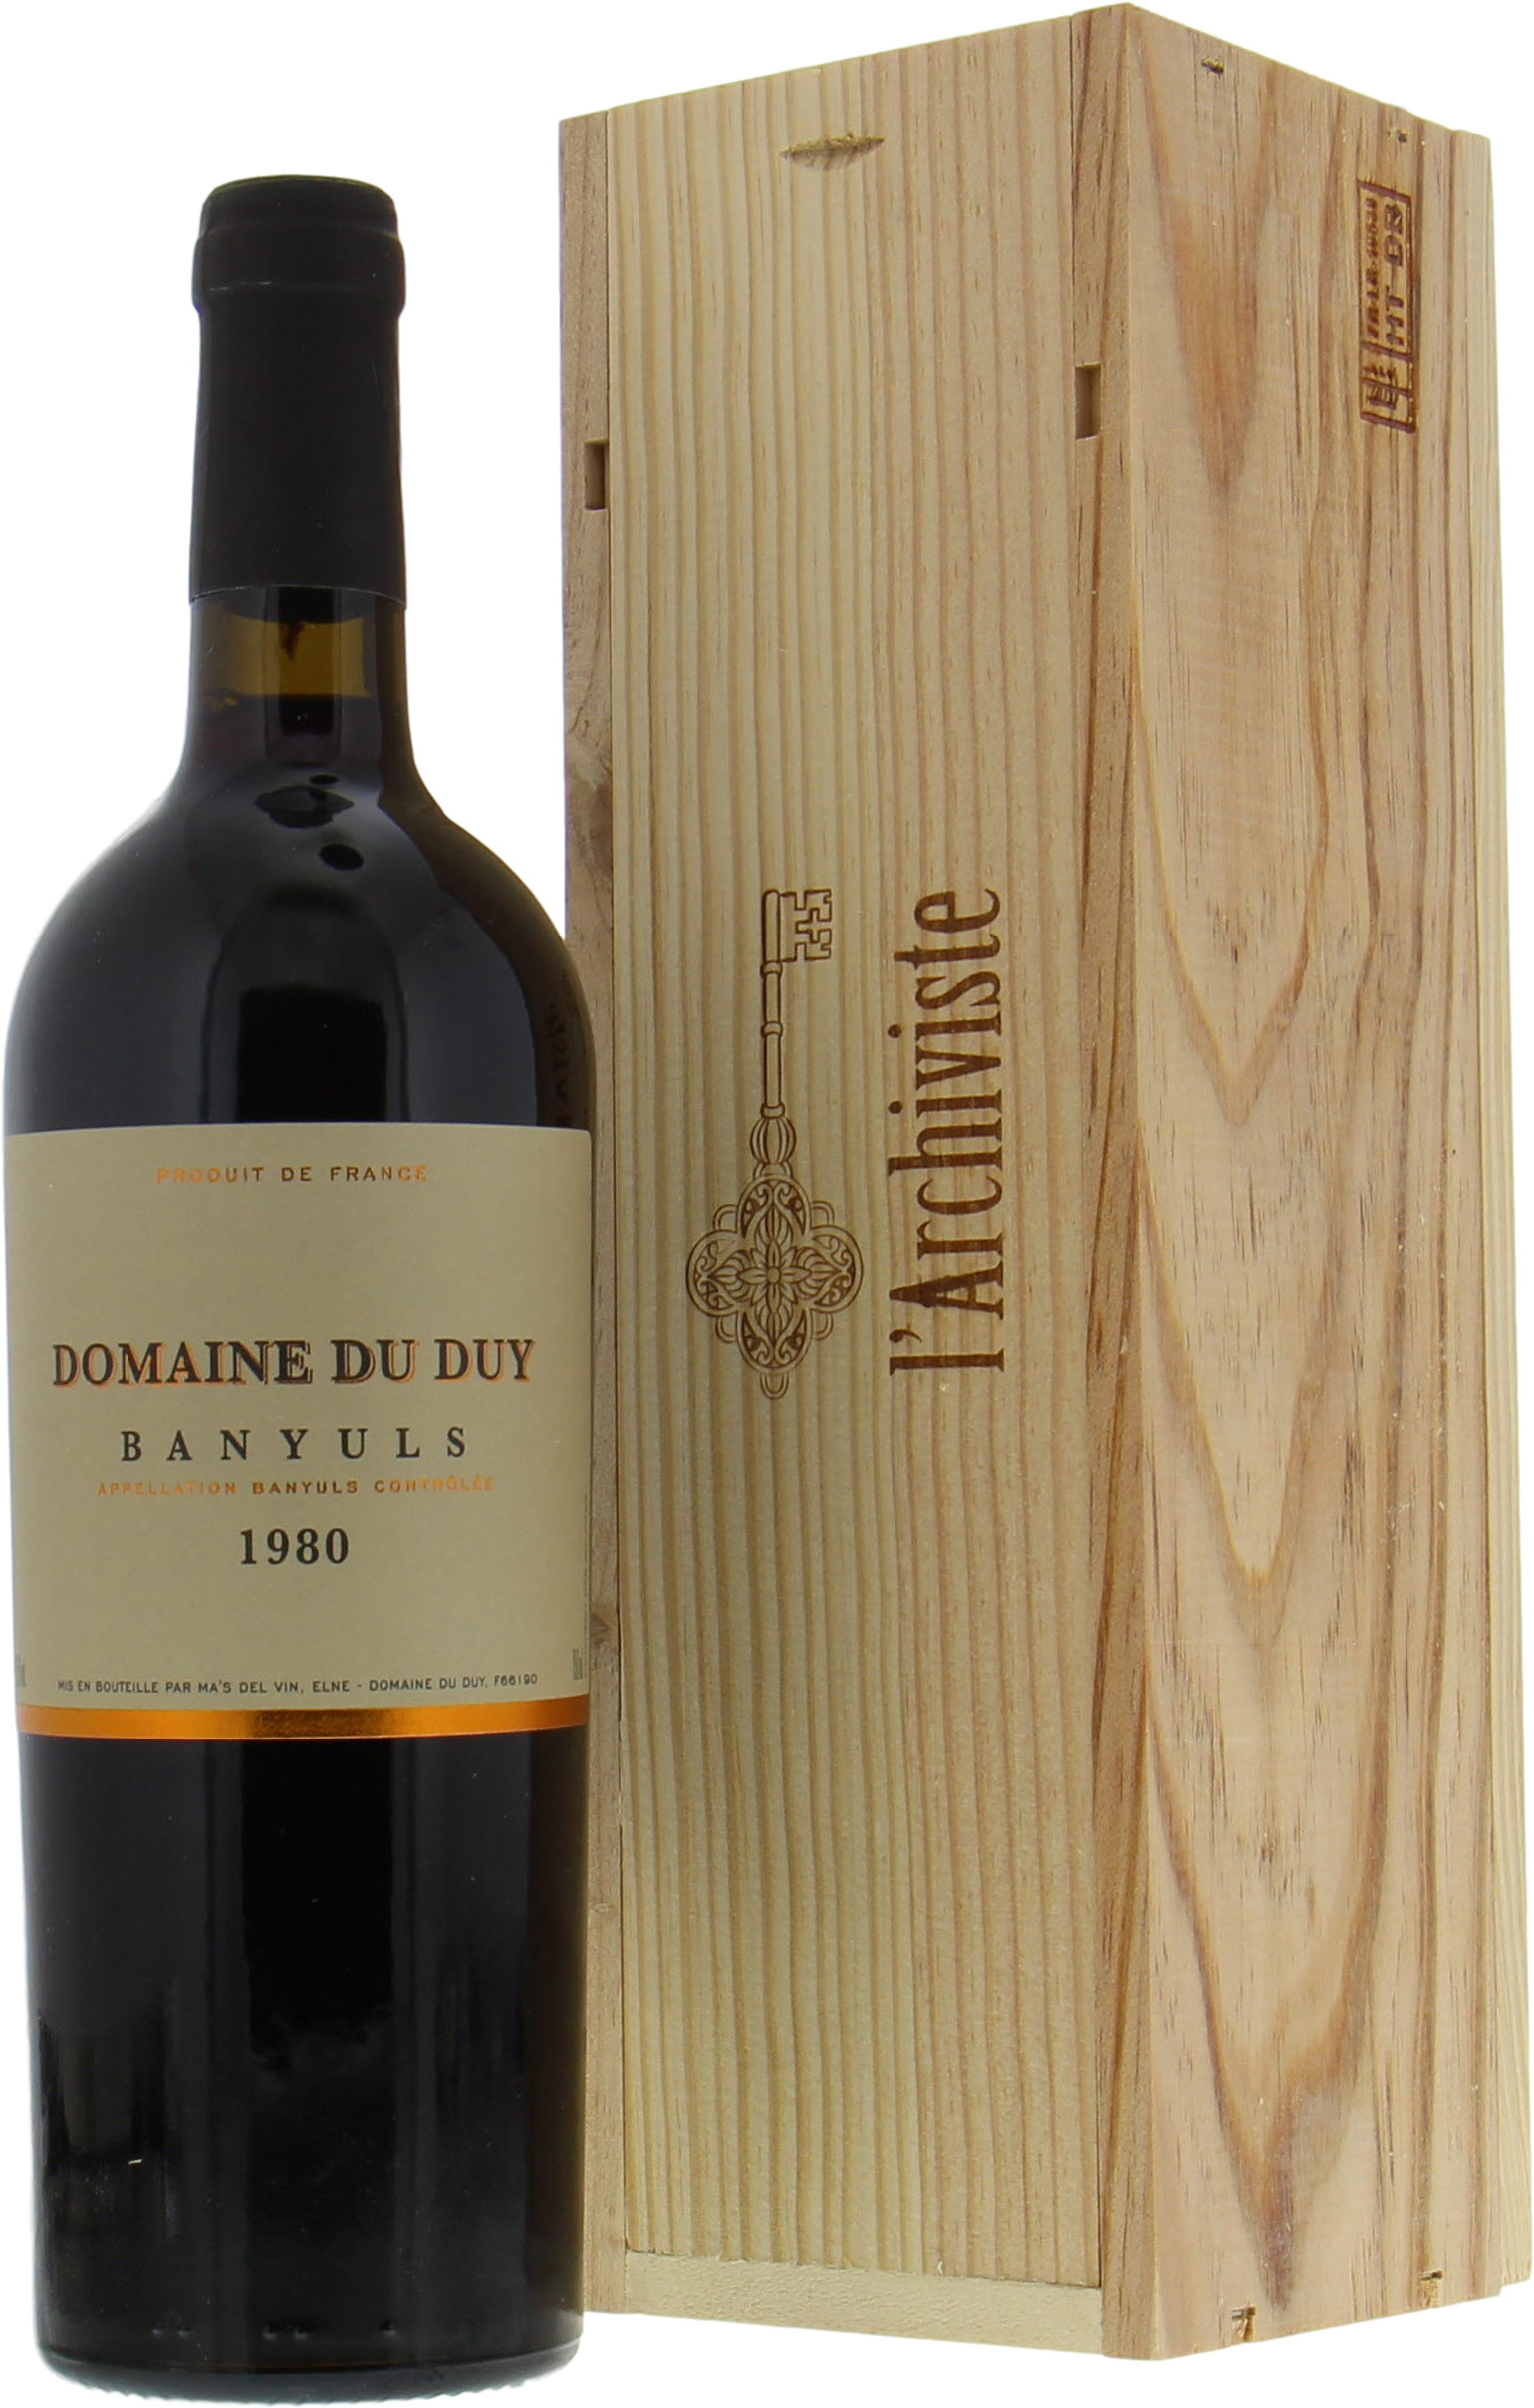 Domaine du Duy - Banyuls 1980 Perfect